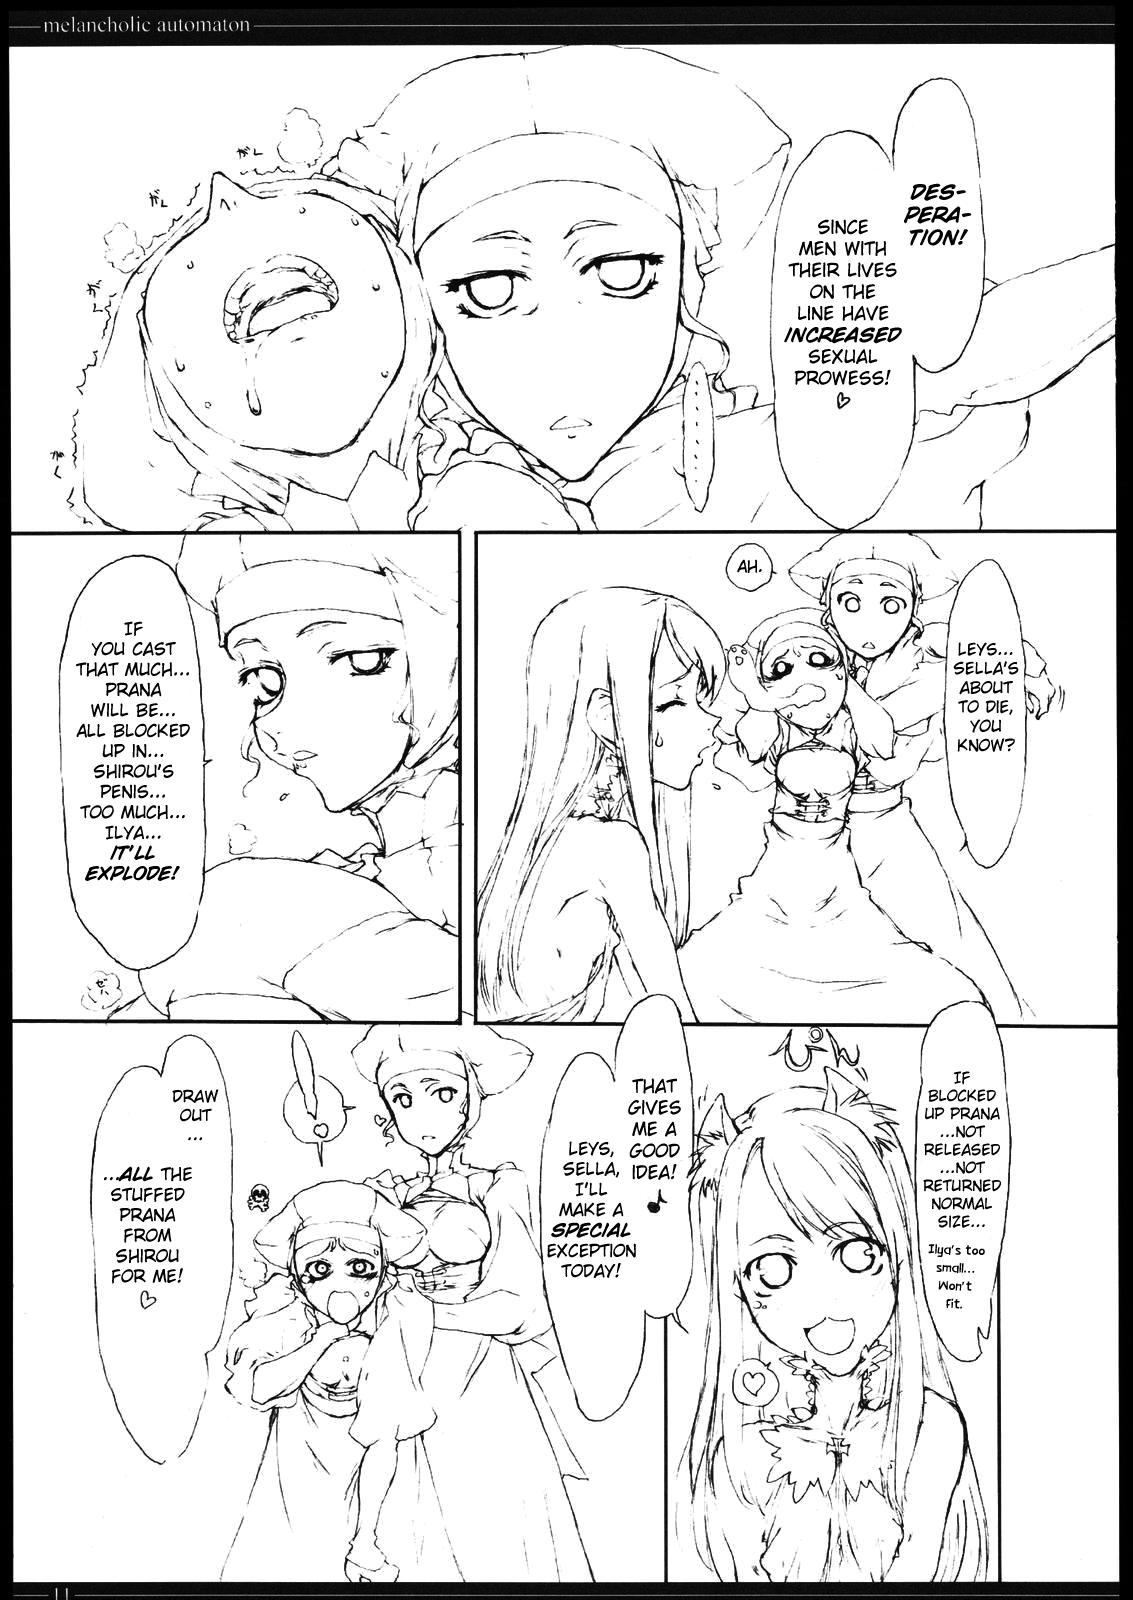 Sentando Melancholic Automaton - One day at the castle of Einzbern - Fate stay night Shorts - Page 10